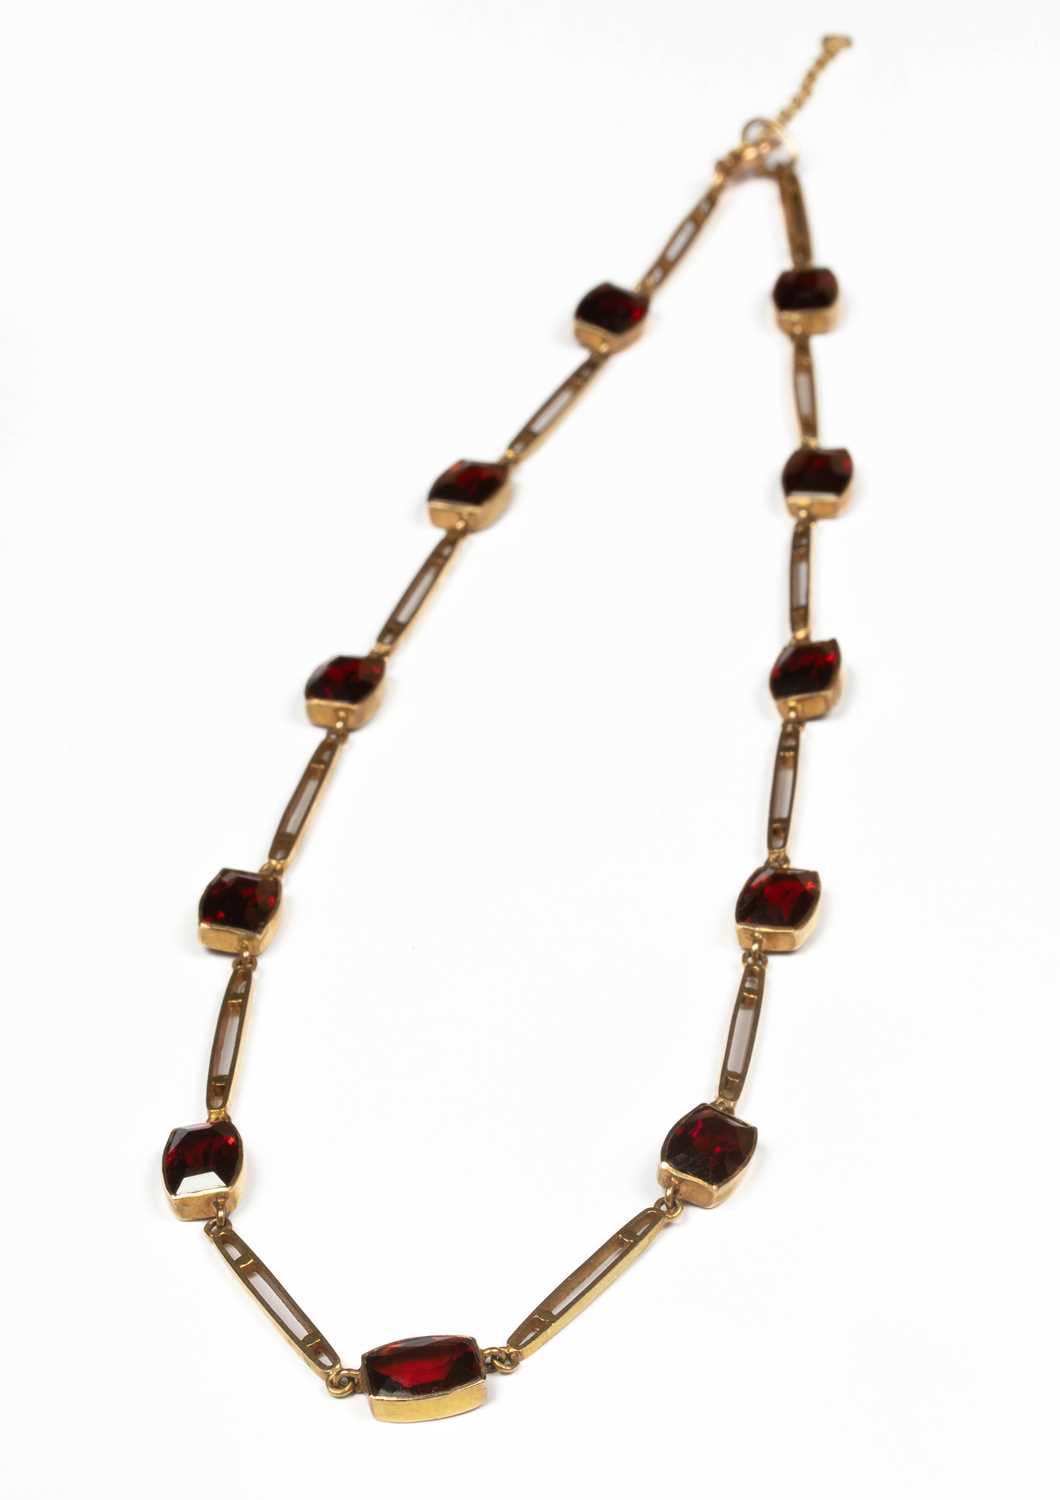 A garnet and 9ct gold necklace - Image 3 of 3